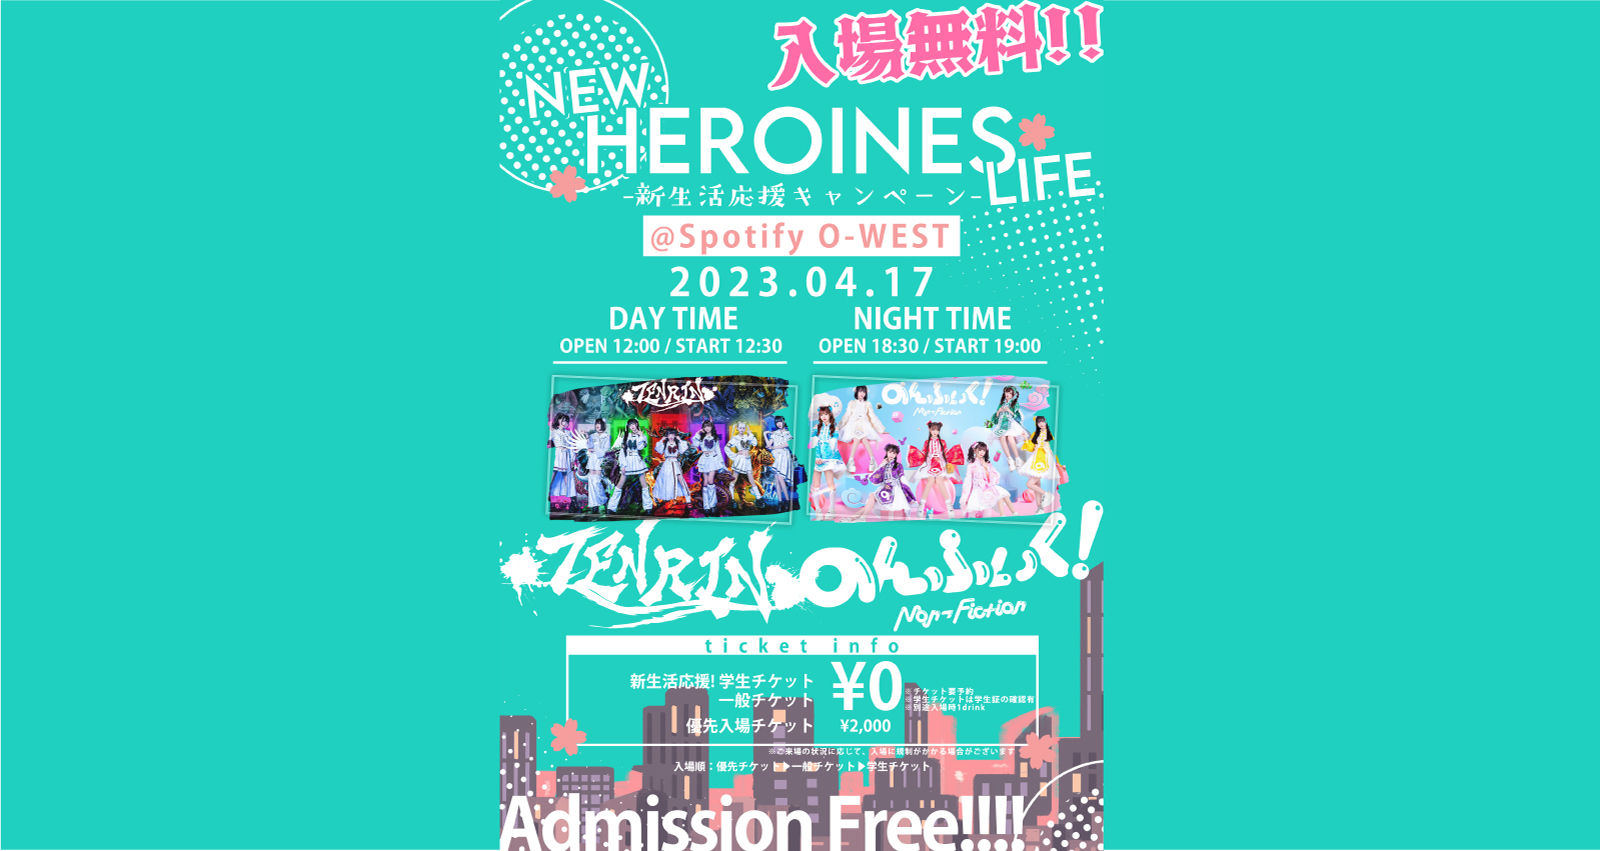 NEW HEROINES LIFE -新生活応援キャンペーン-NIGHT TIME